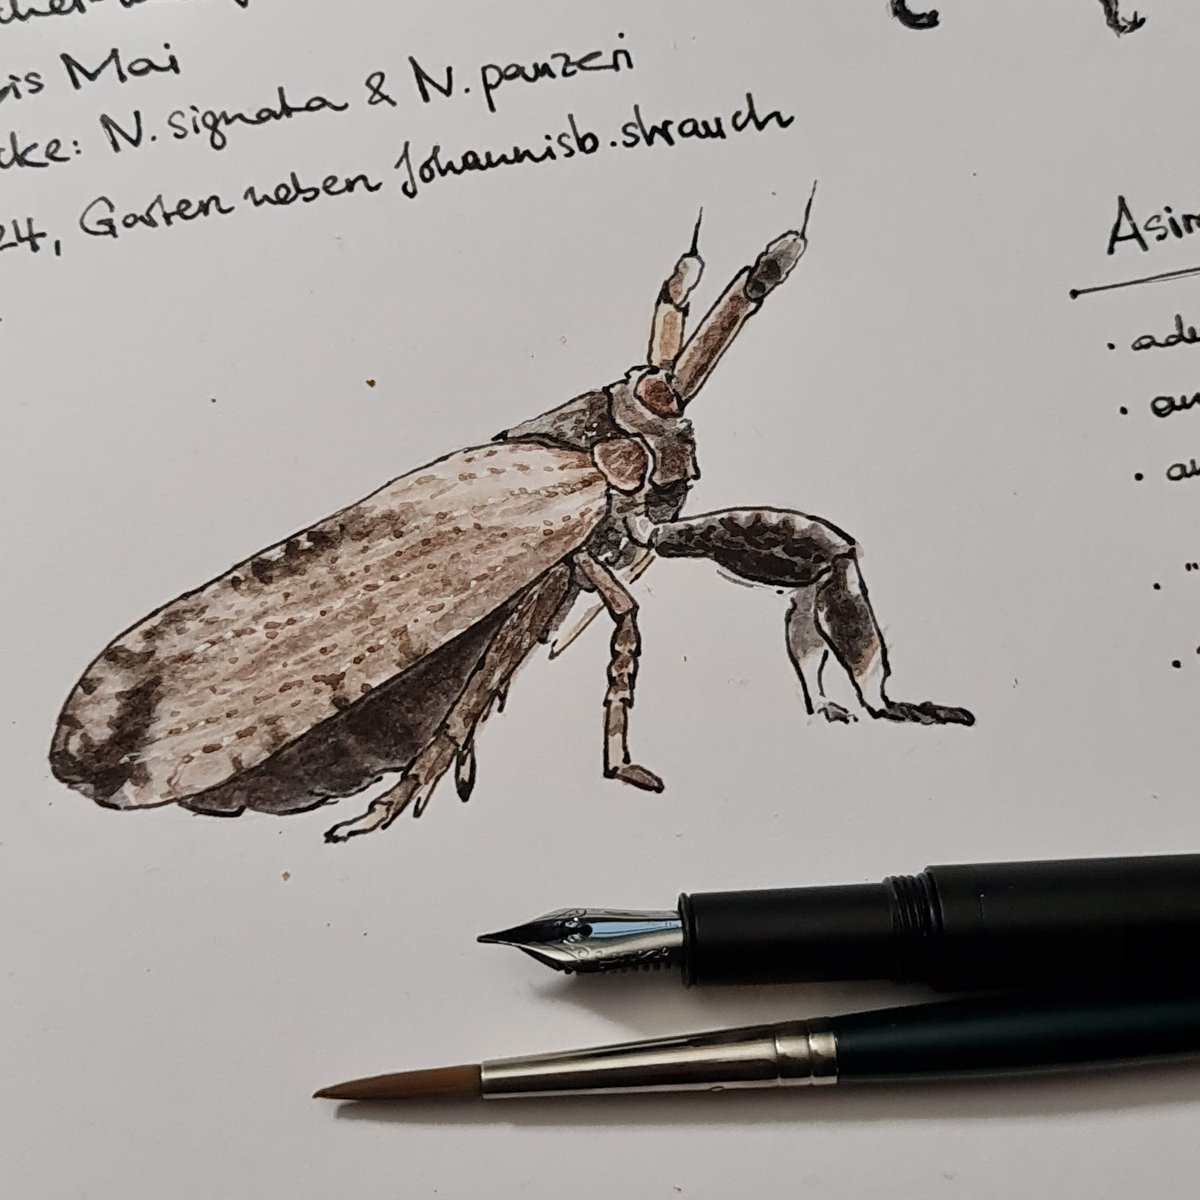 #littlecritterdiary DAY 19 Asiraca clavicornis, a peculiar planthopper from my garden. Rather rare but widespread in warm and dry places all year round.